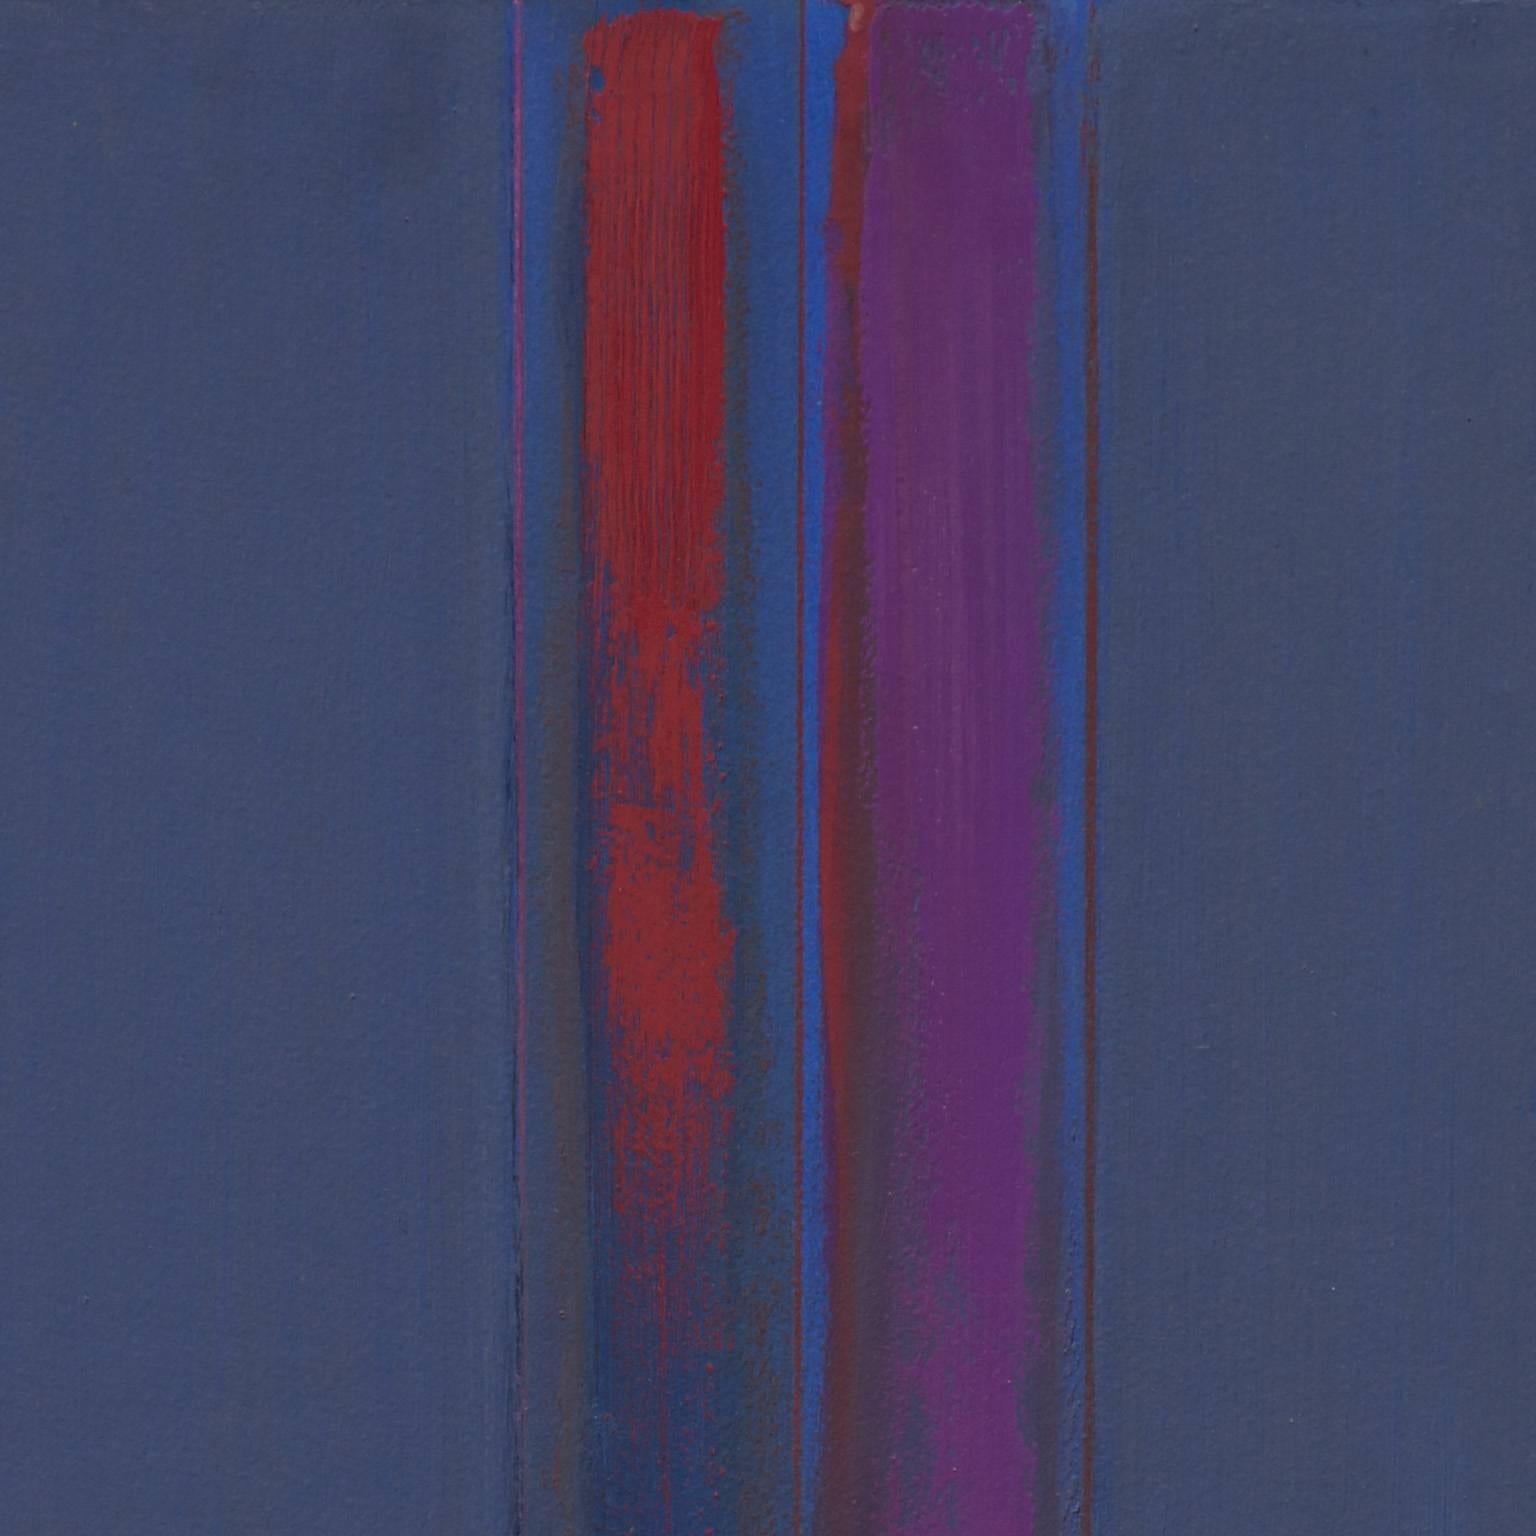 Martin Canin is an American artist known for his intense color field and abstract geometric paintings. Though at first it would be easy to assimilate Canin's paintings to the work of color field artists like Barnett Newman or Jack Bush, Canin’s